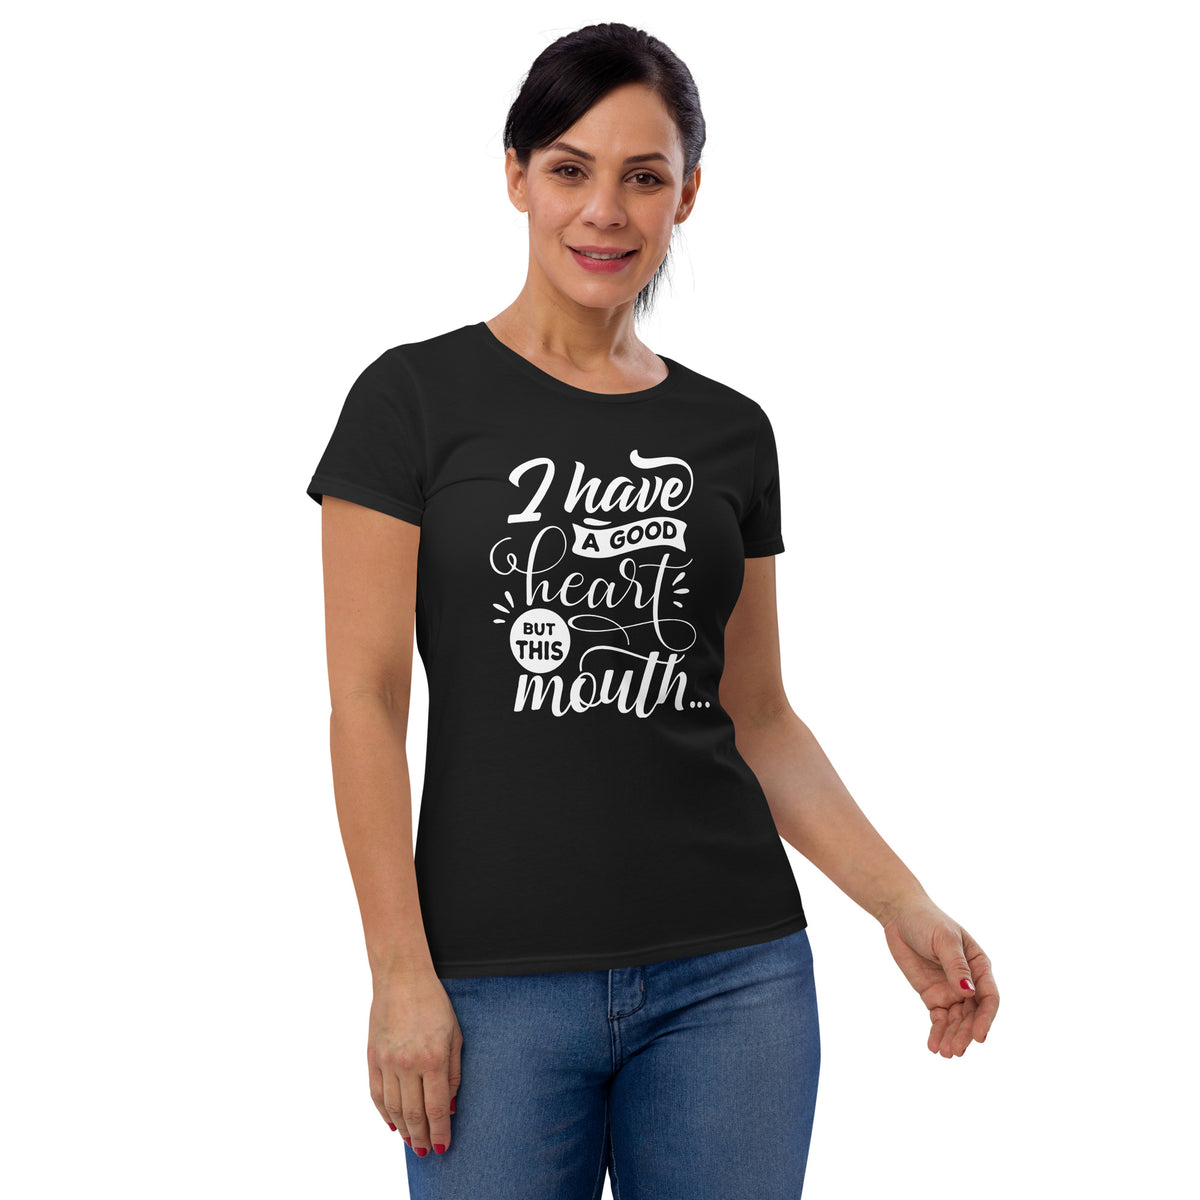 I have A Good Heart But This Mouth Women's Short Sleeve T-Shirt